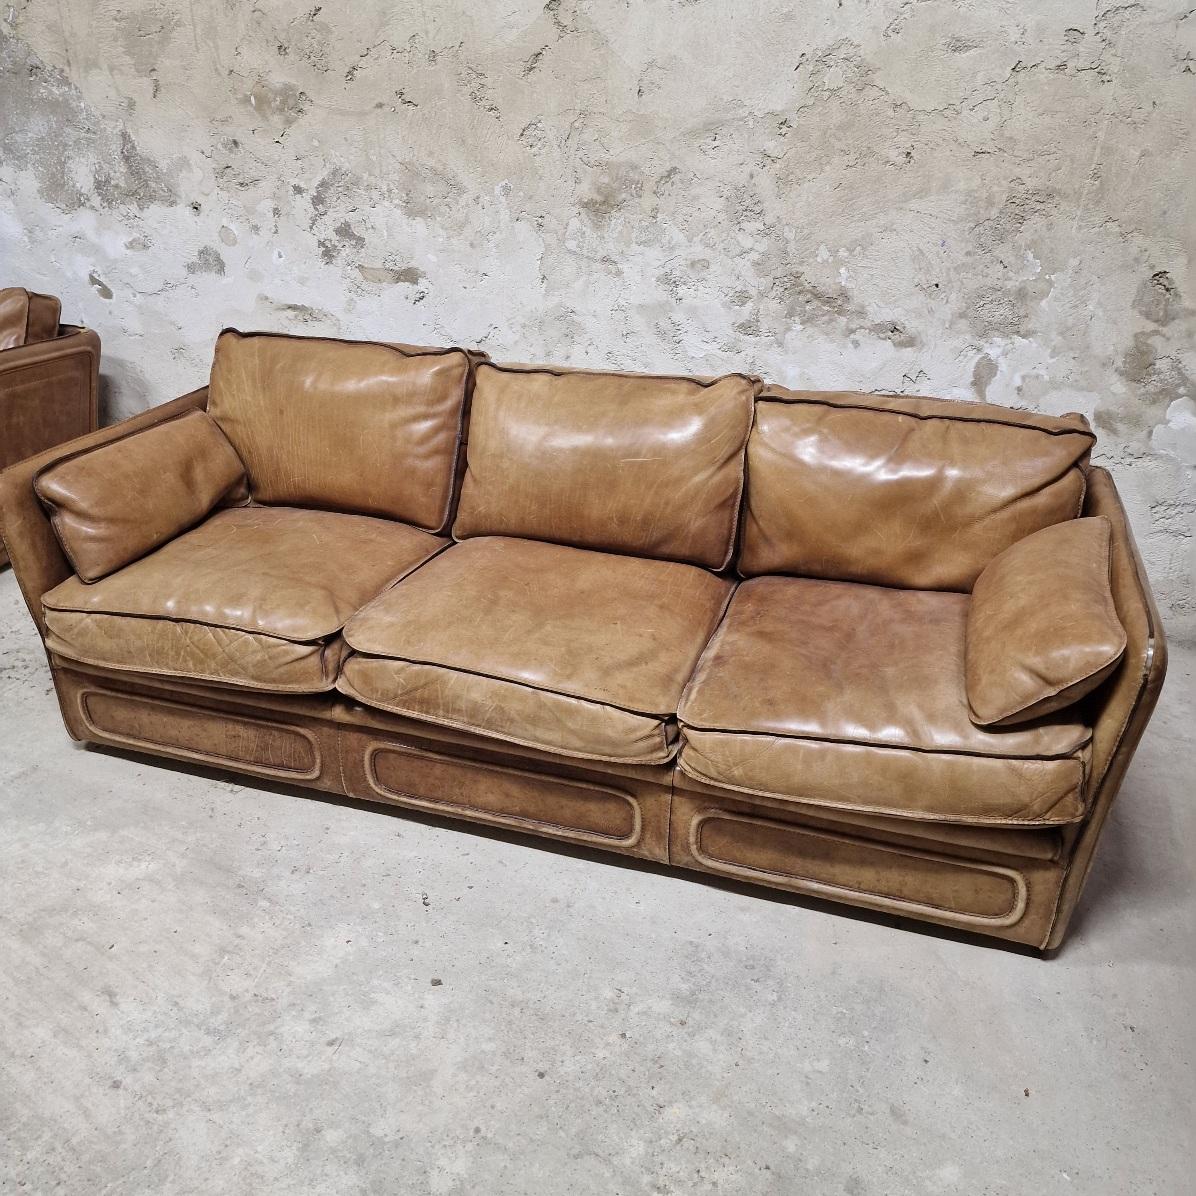 Roche Bobois 3-seater full-grain leather sofa with feather cushions circa 1980.